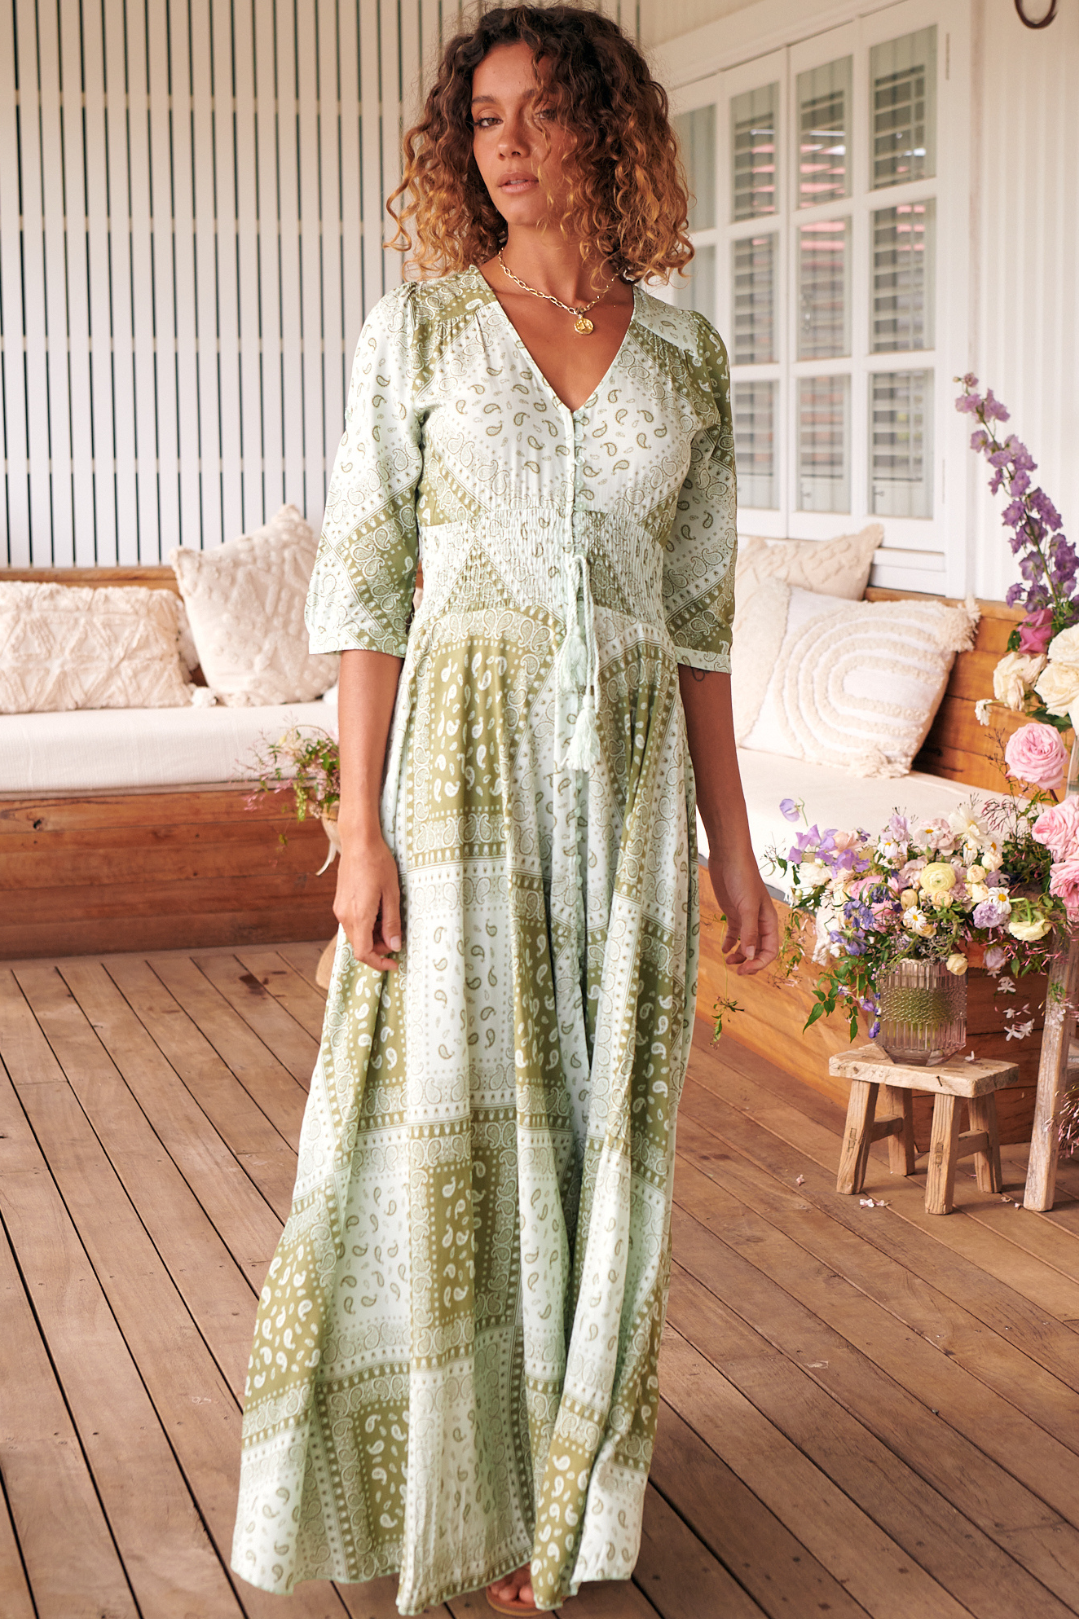 JAASE - Indiana Maxi Dress: Lace Back Shirred Waist A Line Dress with Handkercheif Hemline in Thyme Print